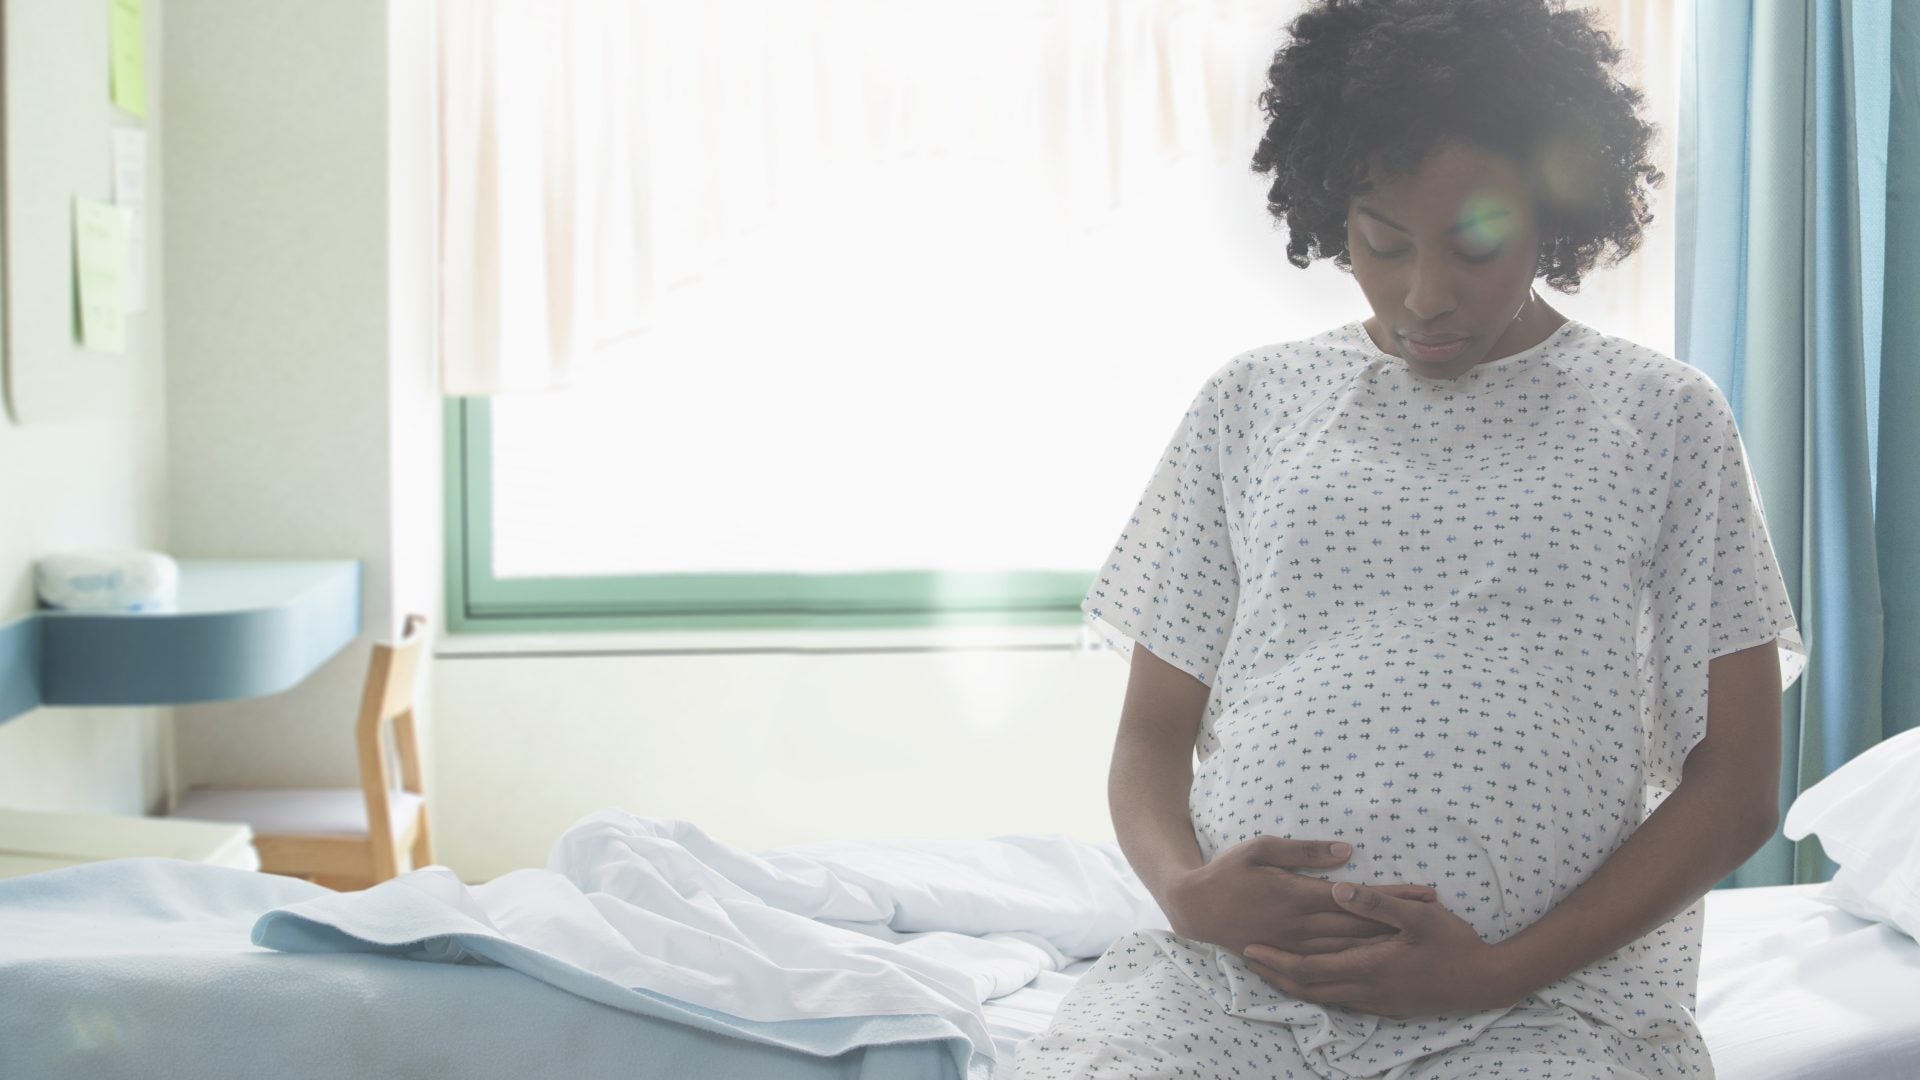 Want To Save Black Mothers? Start By Honoring Our Stories And Bodily Autonomy